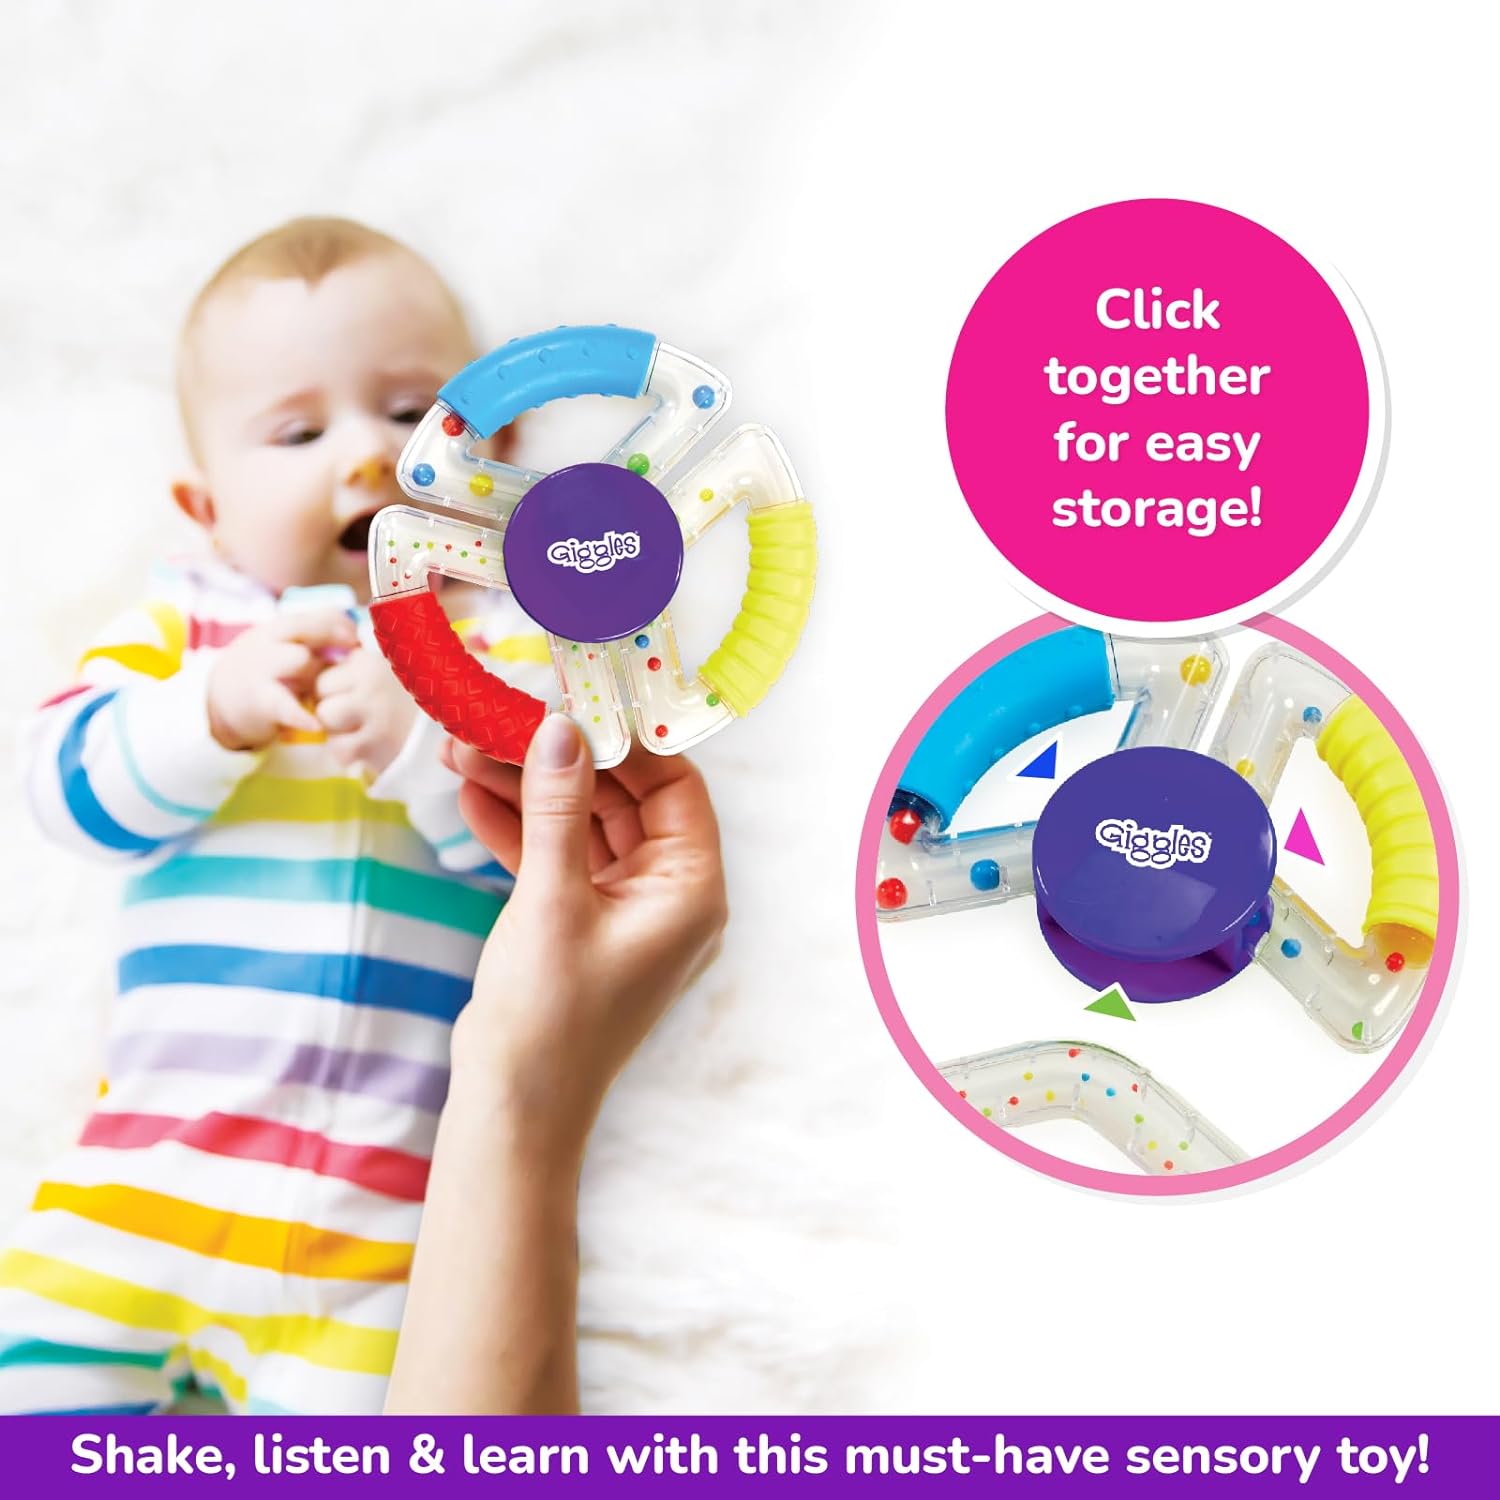 Funskool Giggles Sensory Rattle Perfect for Little Hands, 6 Months+